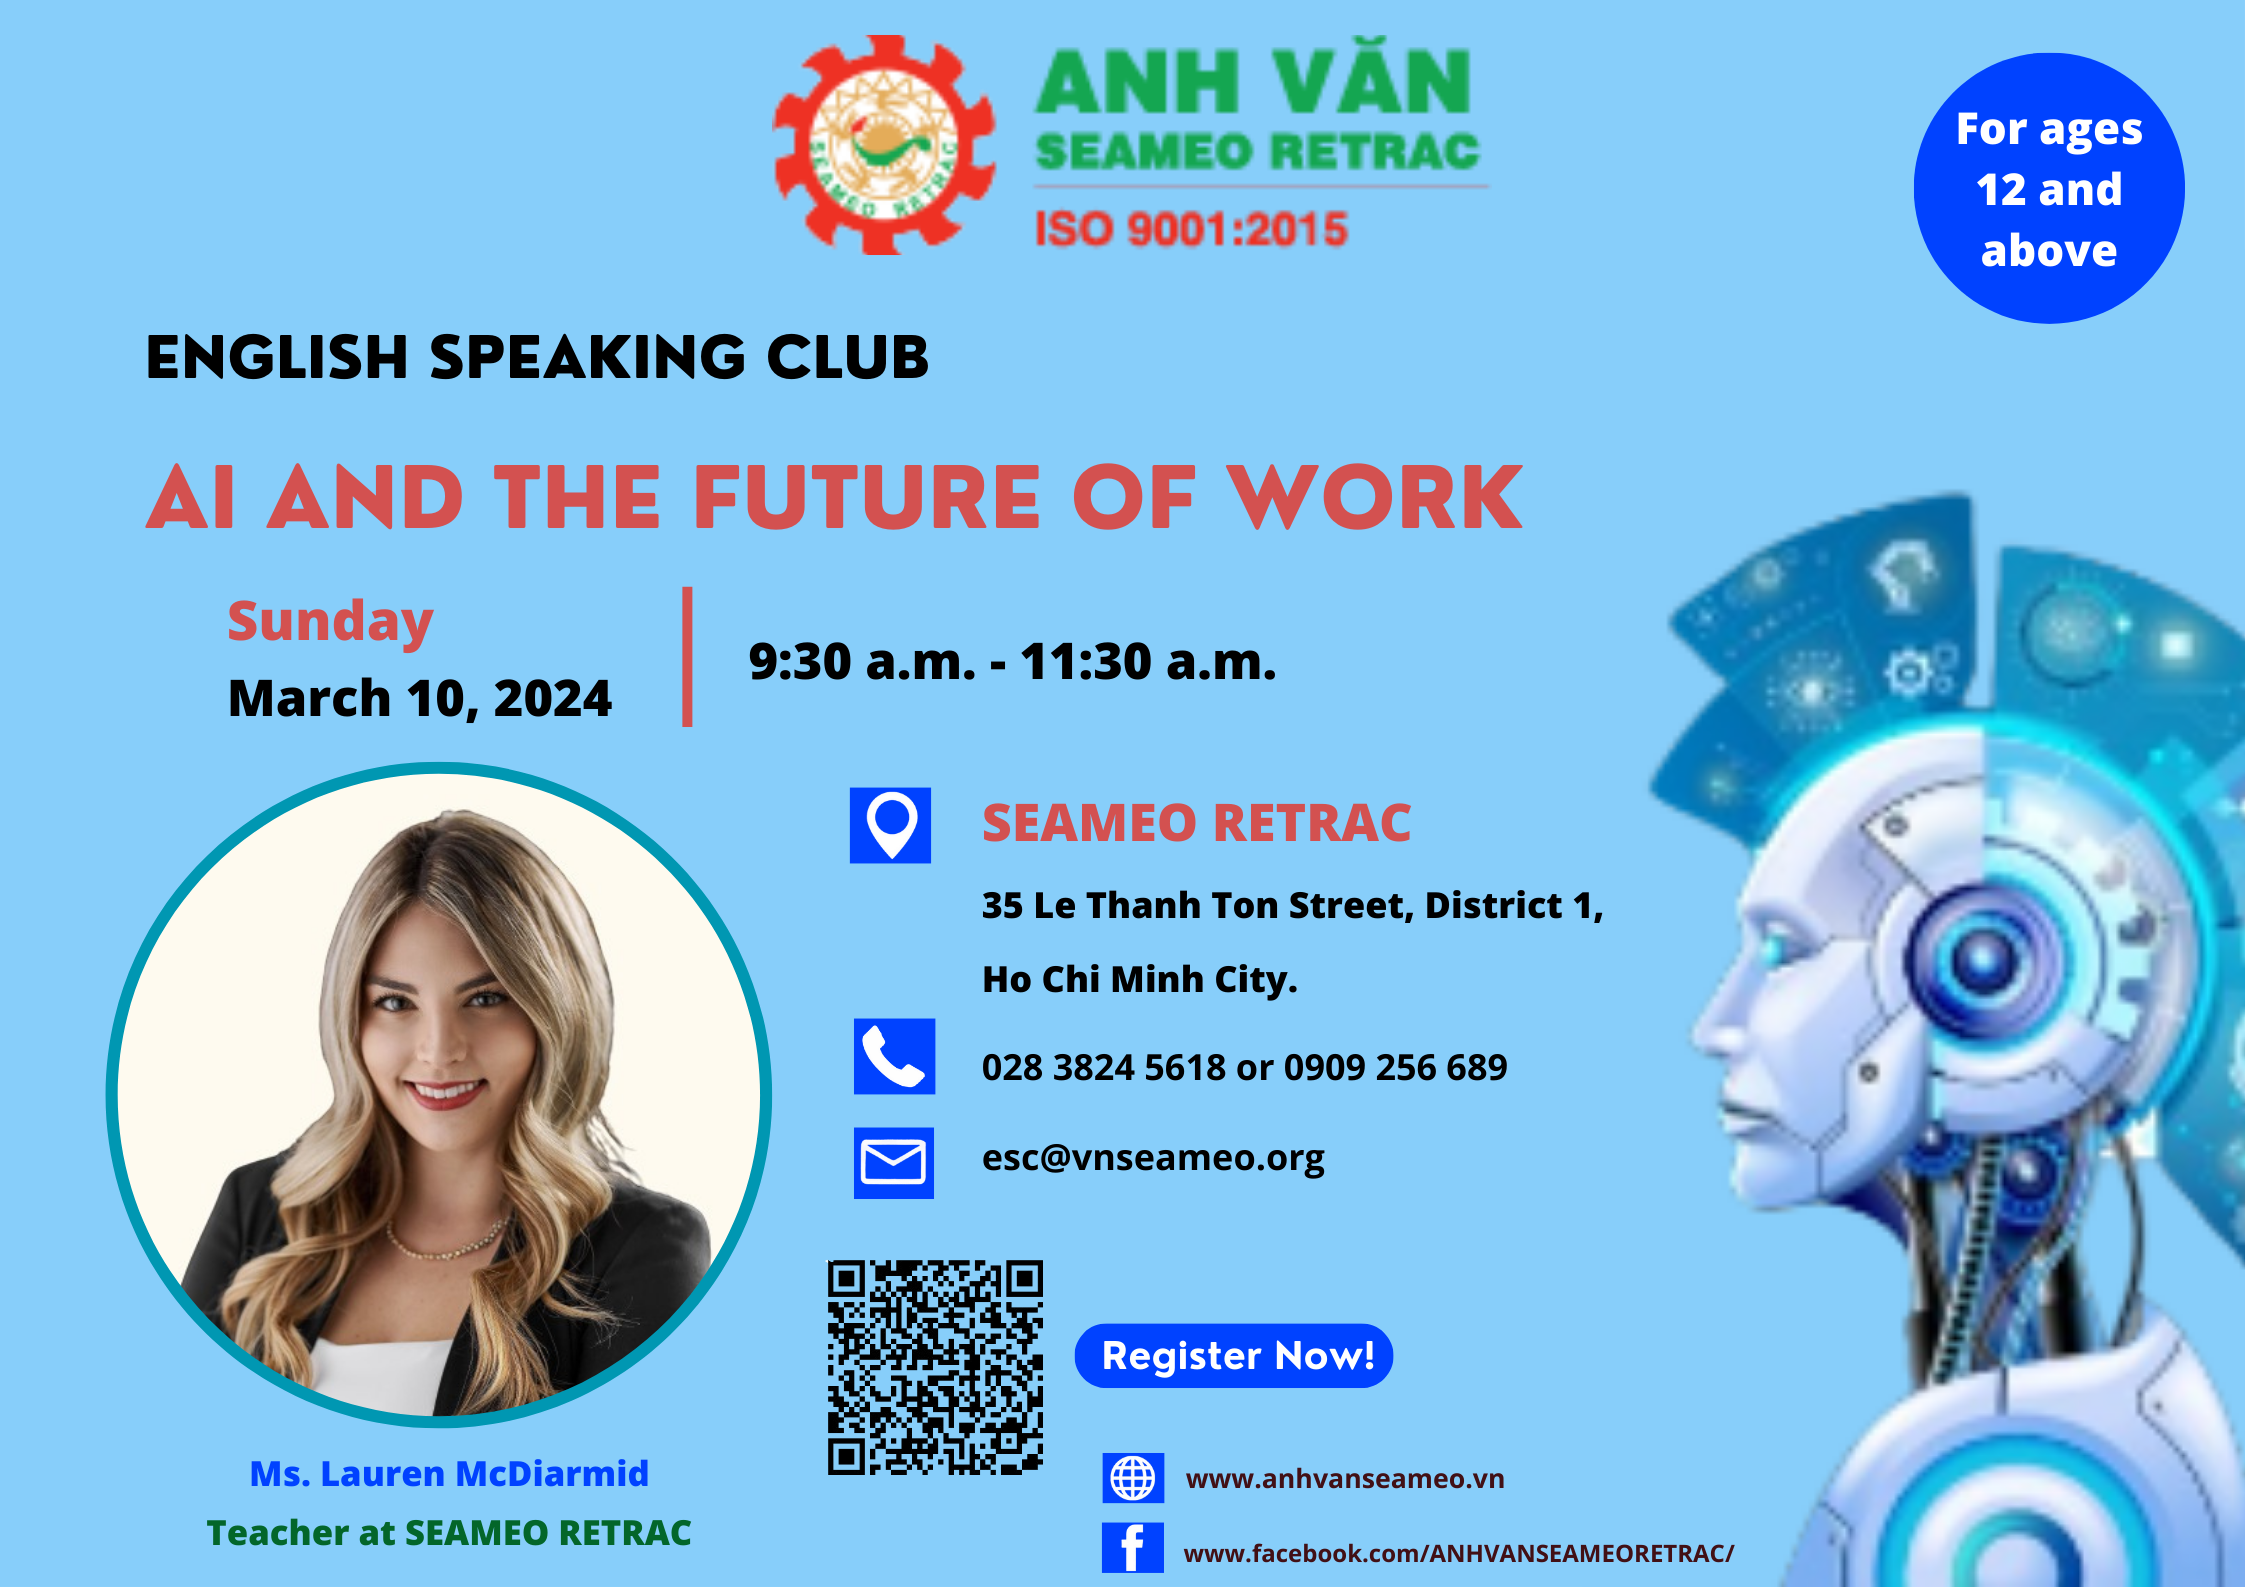 English Speaking Club: Topic: “AI AND THE FUTURE OF WORK”